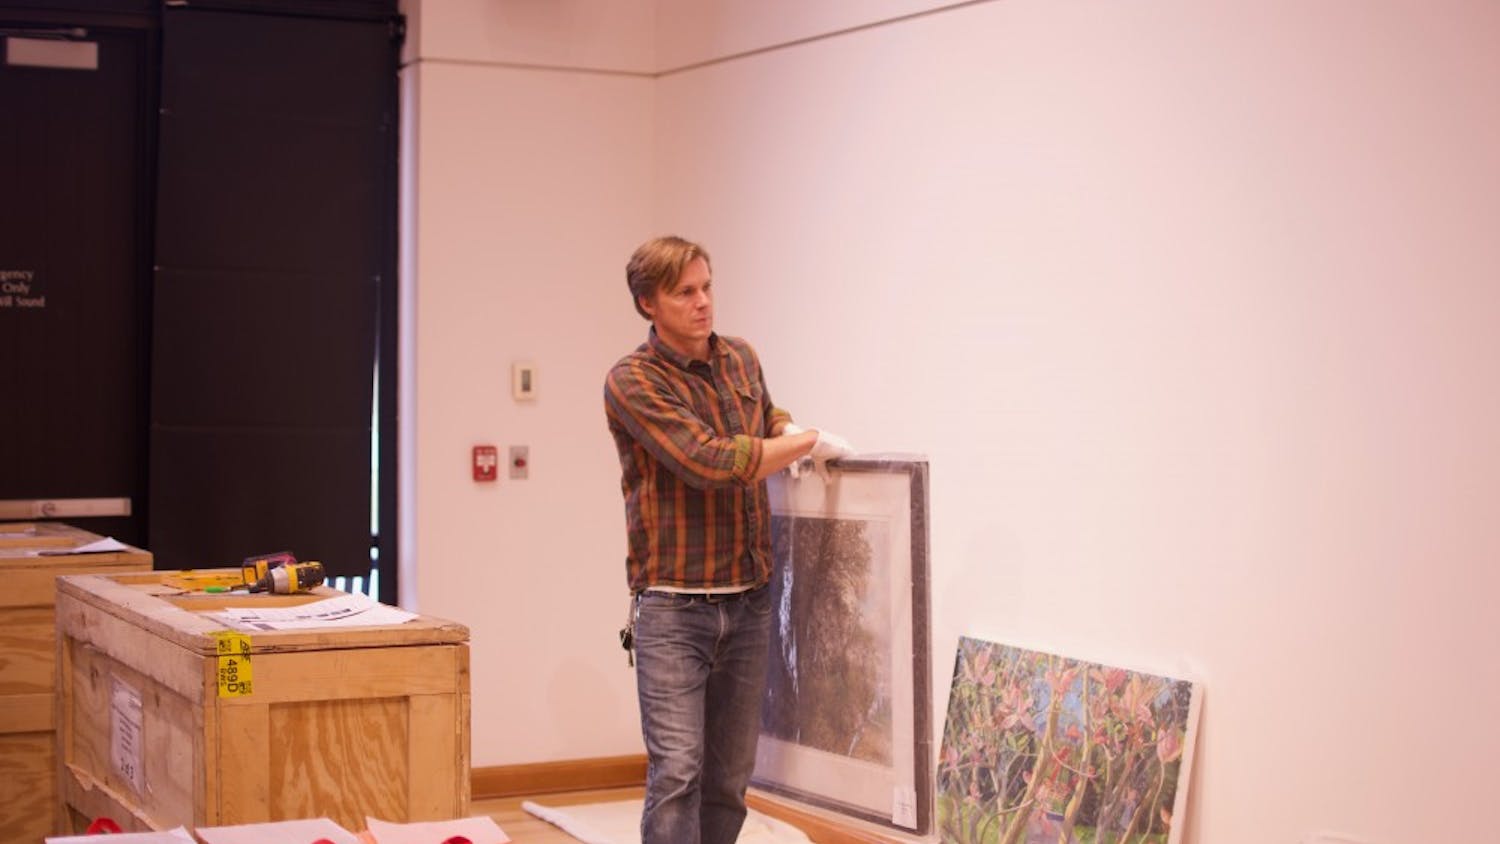 Gallery curator Jeremie Riggleman sets up the new exhibit.